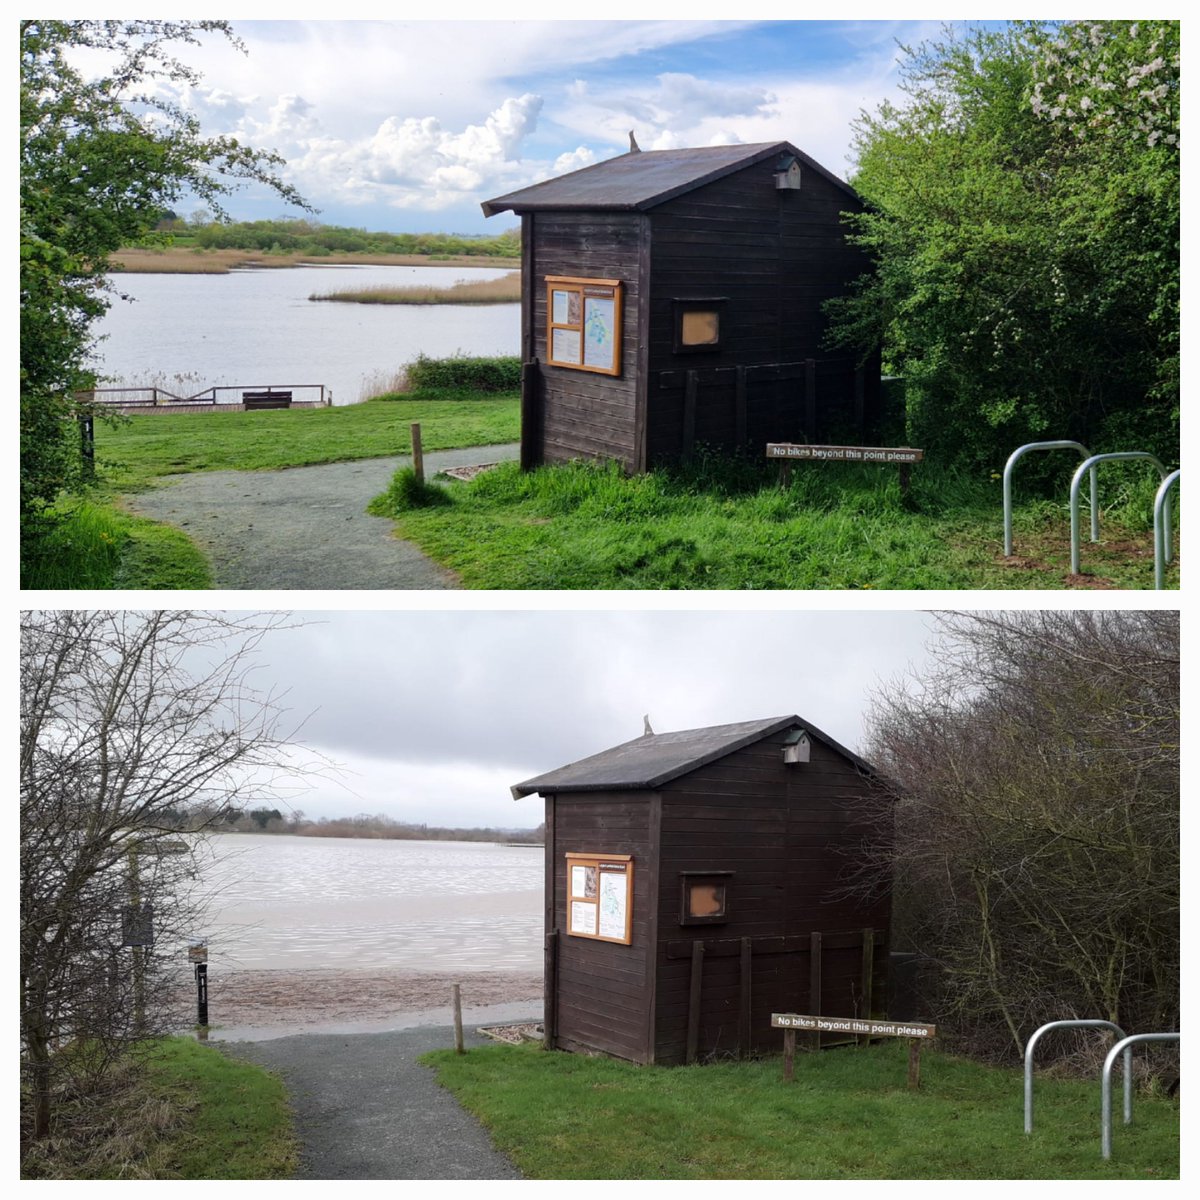 Reserve still closed, but water levels have dropped by 3 metres. Outer perimeter footpath can now be walked, but watch out for debris around Phase 3 & the downed fence on NE edge of Phase 1. 31 dunlin, GW egret & 6 goosander reported today. Photo comparing before & during flood